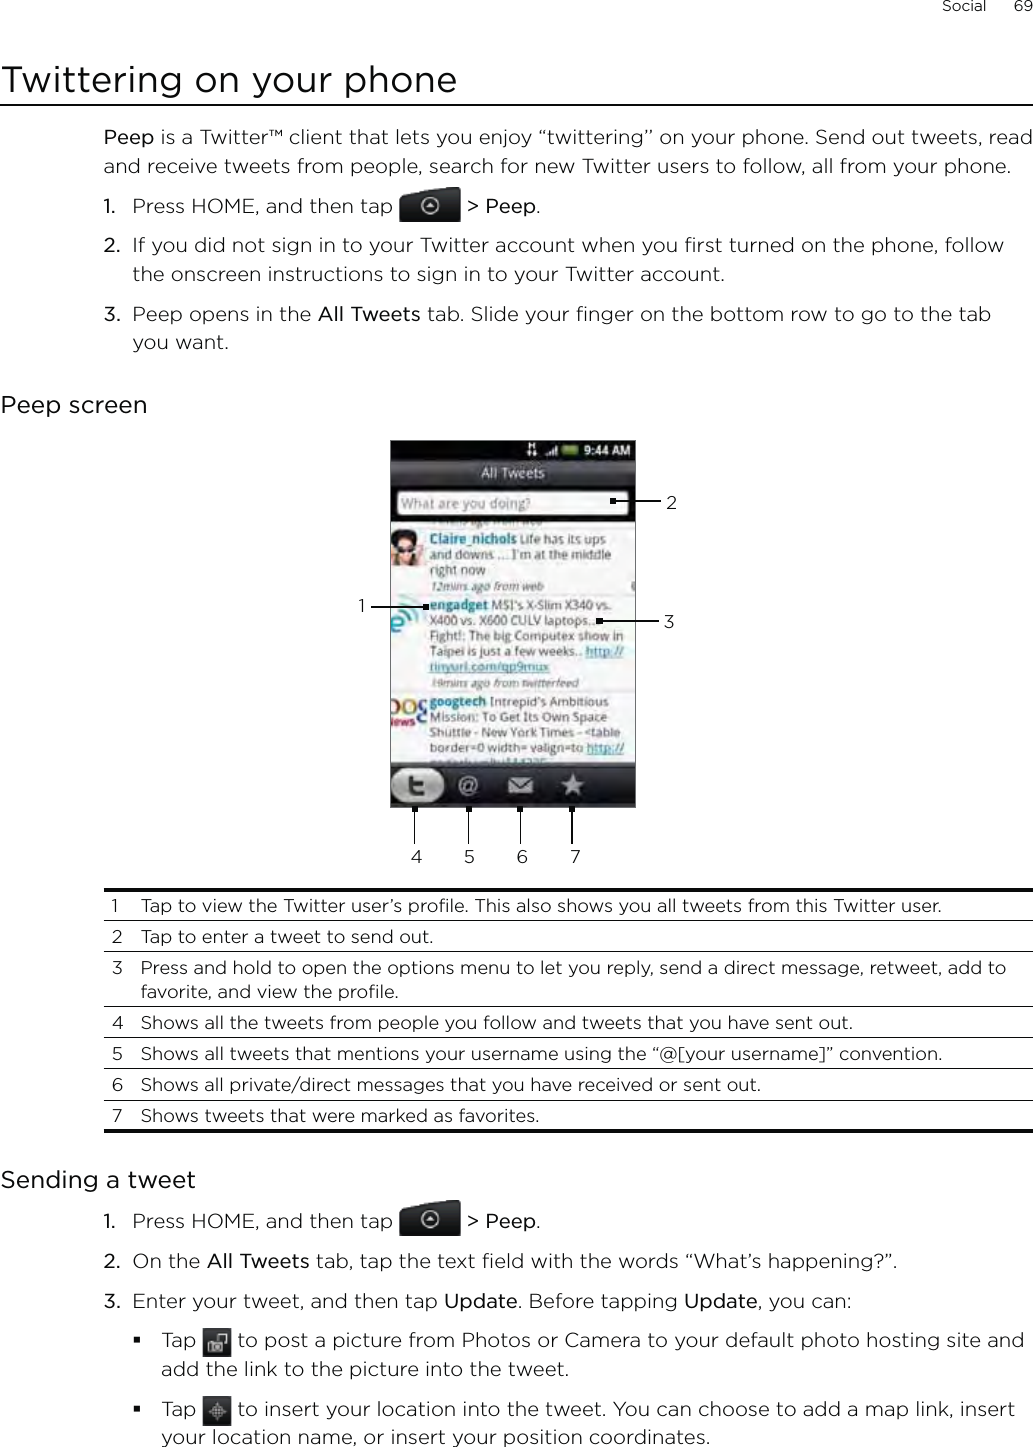 Social      69Twittering on your phonePeep is a Twitter™ client that lets you enjoy “twittering’’ on your phone. Send out tweets, read and receive tweets from people, search for new Twitter users to follow, all from your phone.1.  Press HOME, and then tap  &gt; Peep.2.  If you did not sign in to your Twitter account when you first turned on the phone, follow the onscreen instructions to sign in to your Twitter account.3.  Peep opens in the All Tweets tab. Slide your finger on the bottom row to go to the tab you want.Peep screen23456711  Tap to view the Twitter user’s profile. This also shows you all tweets from this Twitter user. 2  Tap to enter a tweet to send out. 3  Press and hold to open the options menu to let you reply, send a direct message, retweet, add to favorite, and view the profile.4  Shows all the tweets from people you follow and tweets that you have sent out. 5  Shows all tweets that mentions your username using the “@[your username]” convention. 6  Shows all private/direct messages that you have received or sent out. 7  Shows tweets that were marked as favorites.Sending a tweetPress HOME, and then tap  &gt; Peep.On the All Tweets tab, tap the text field with the words “What’s happening?”.    Enter your tweet, and then tap Update. Before tapping Update, you can: Tap   to post a picture from Photos or Camera to your default photo hosting site and add the link to the picture into the tweet.Tap   to insert your location into the tweet. You can choose to add a map link, insert your location name, or insert your position coordinates.1.2.3.